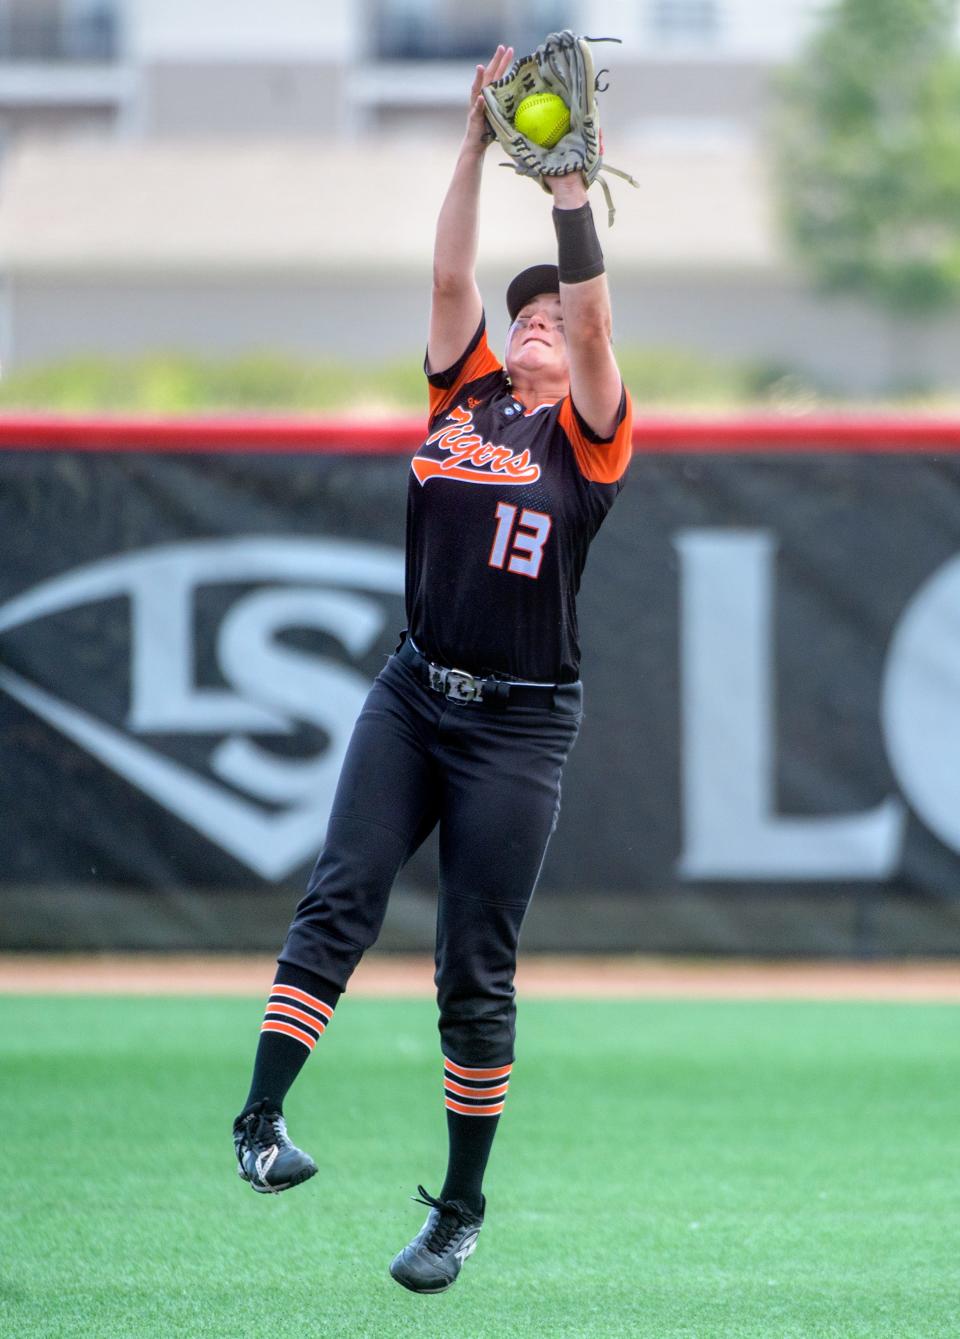 Illini Bluffs shortstop Zoe Eeten leaps to catch a high fly ball from LeRoy during the Class 1A softball state semifinals Friday, June 2, 2023 at the Louisville Slugger Sports Complex in Peoria. The Tigers advanced to the Saturday title game with a 10-0 win in five innings.